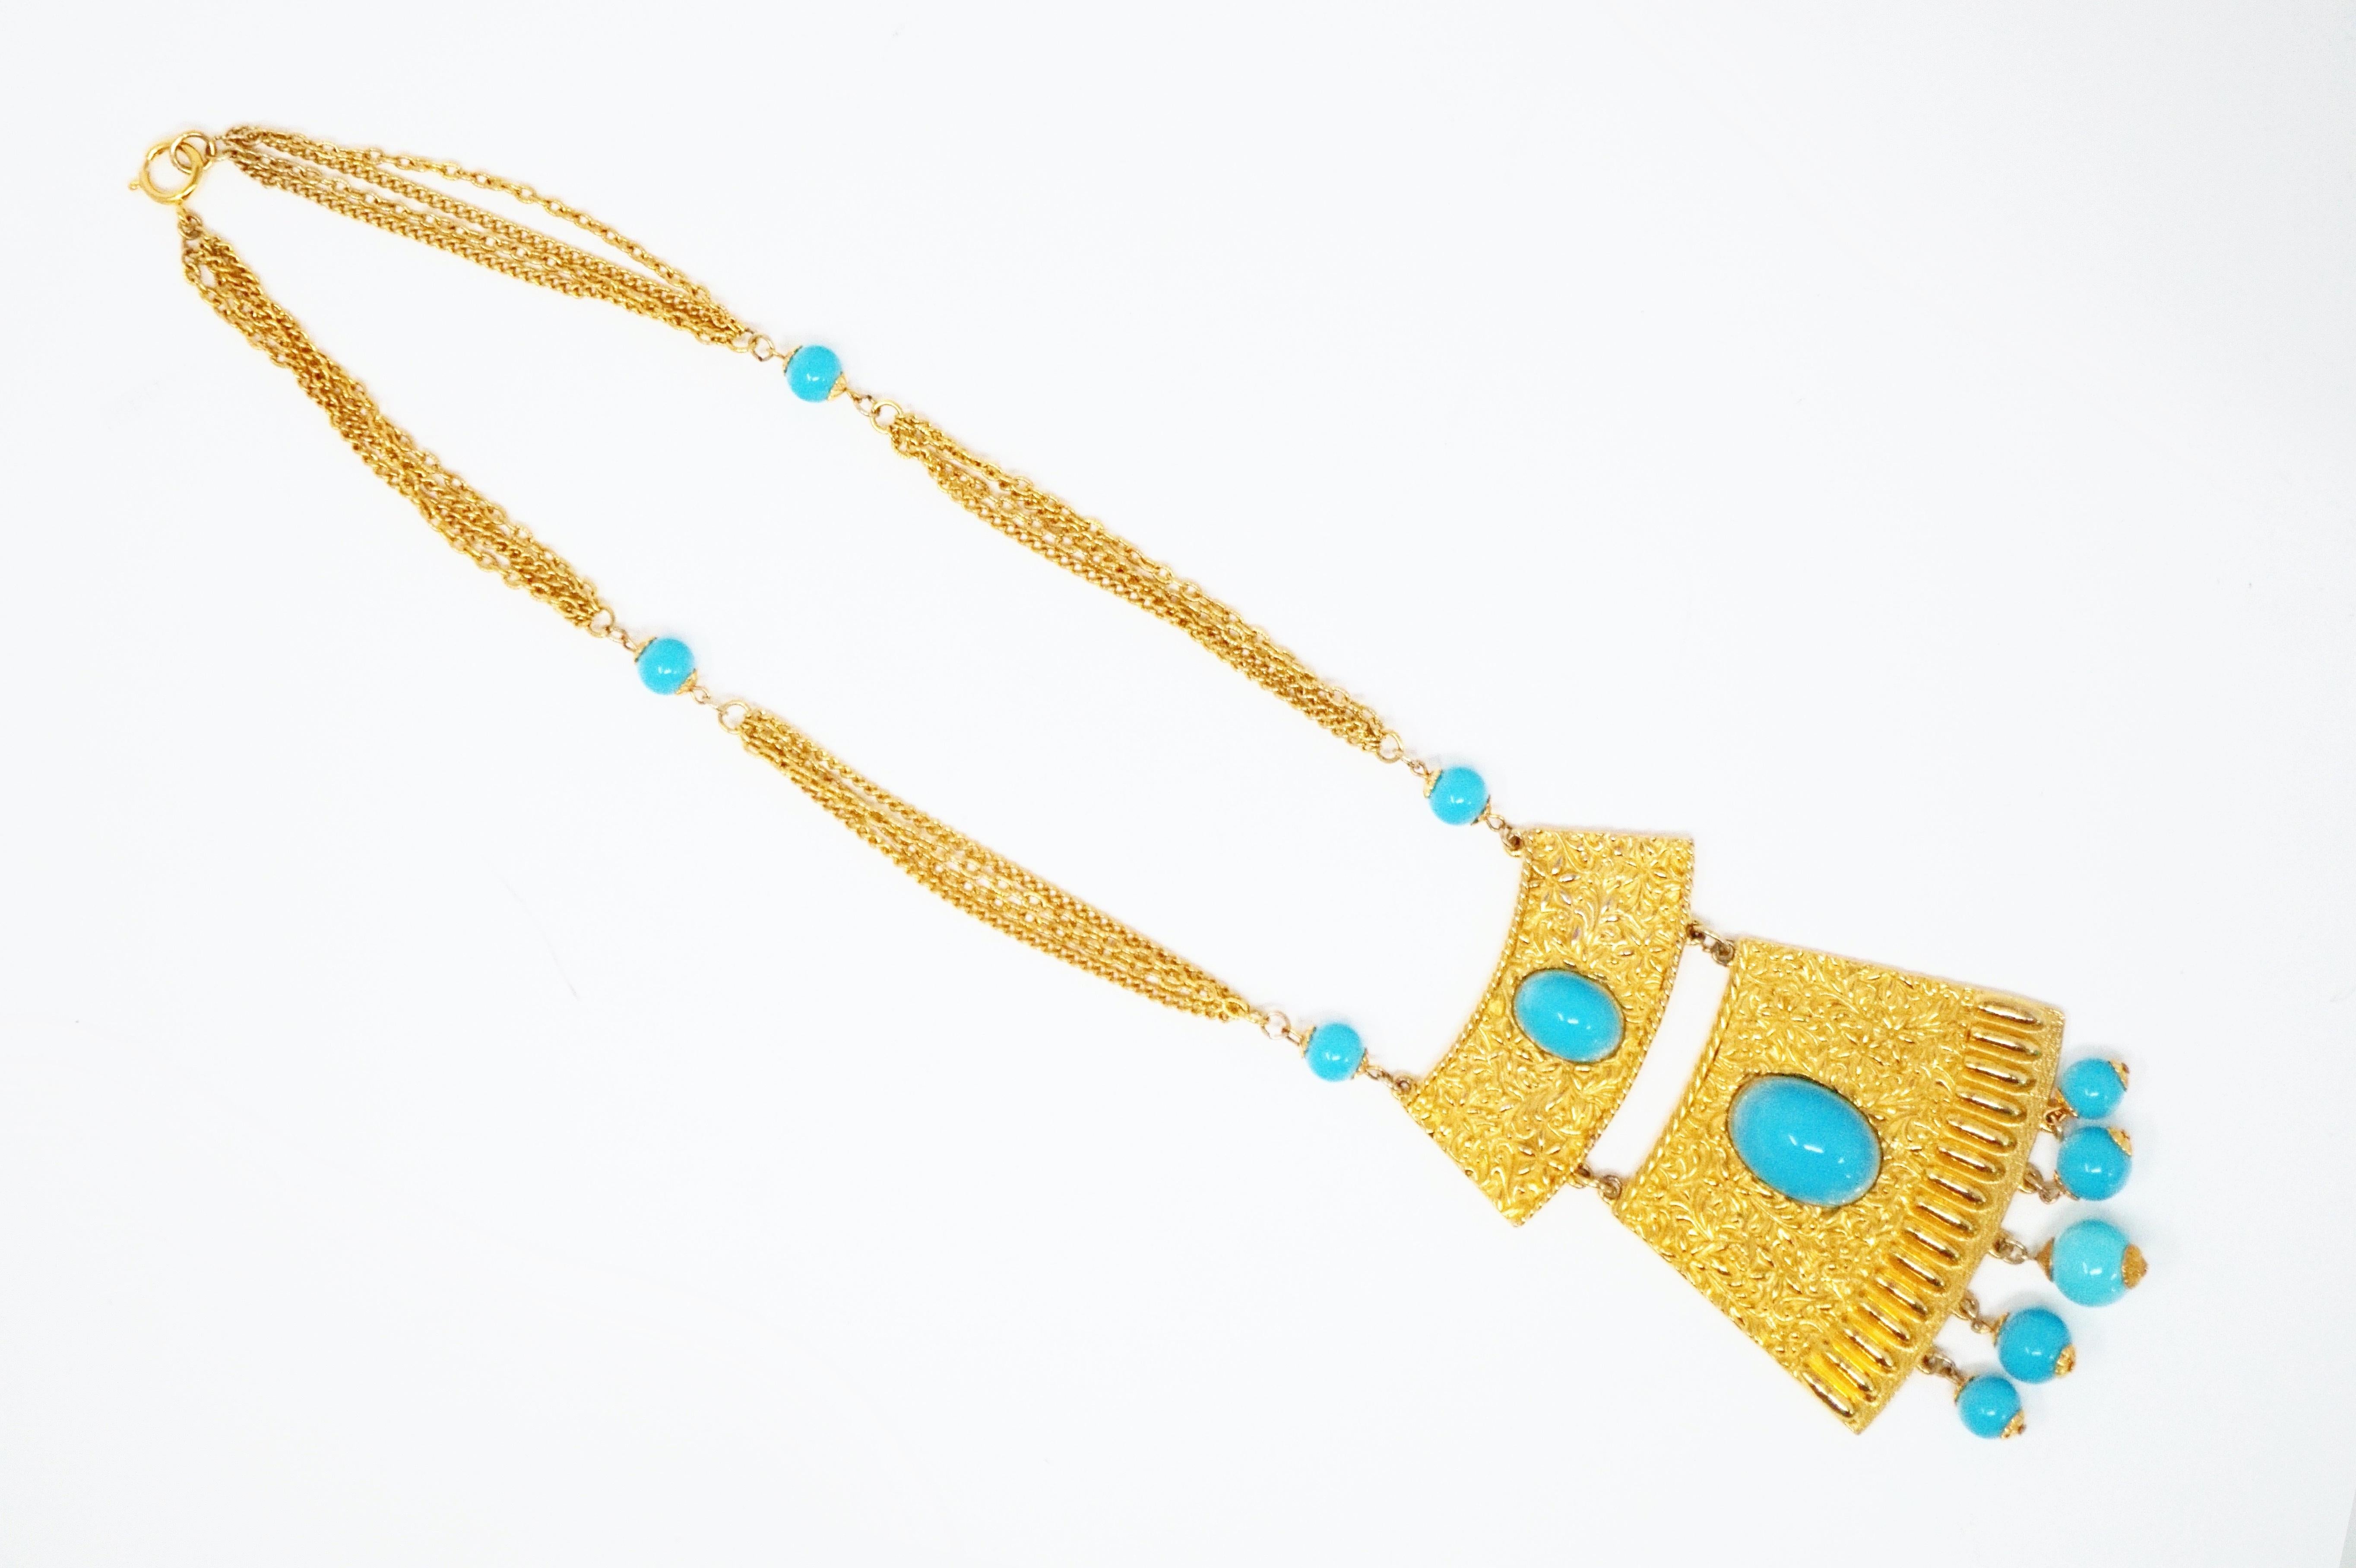 Vintage Goldette Gilt & Turquoise Etruscan Revival Statement Necklace, 1970s In Excellent Condition For Sale In McKinney, TX